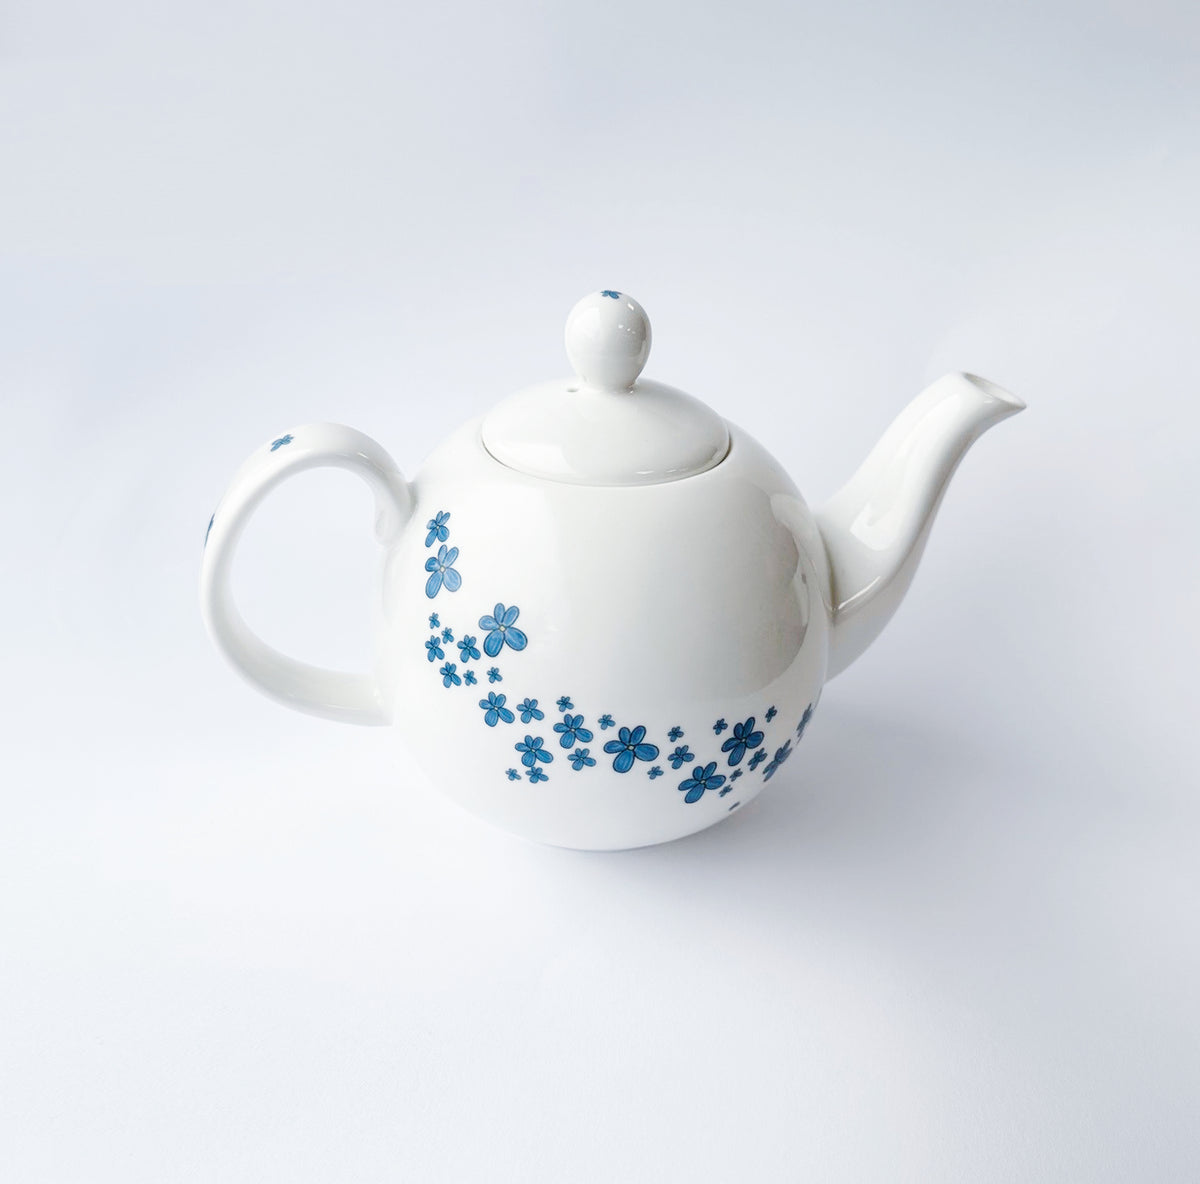 Forget-me-not 3 cup teapot